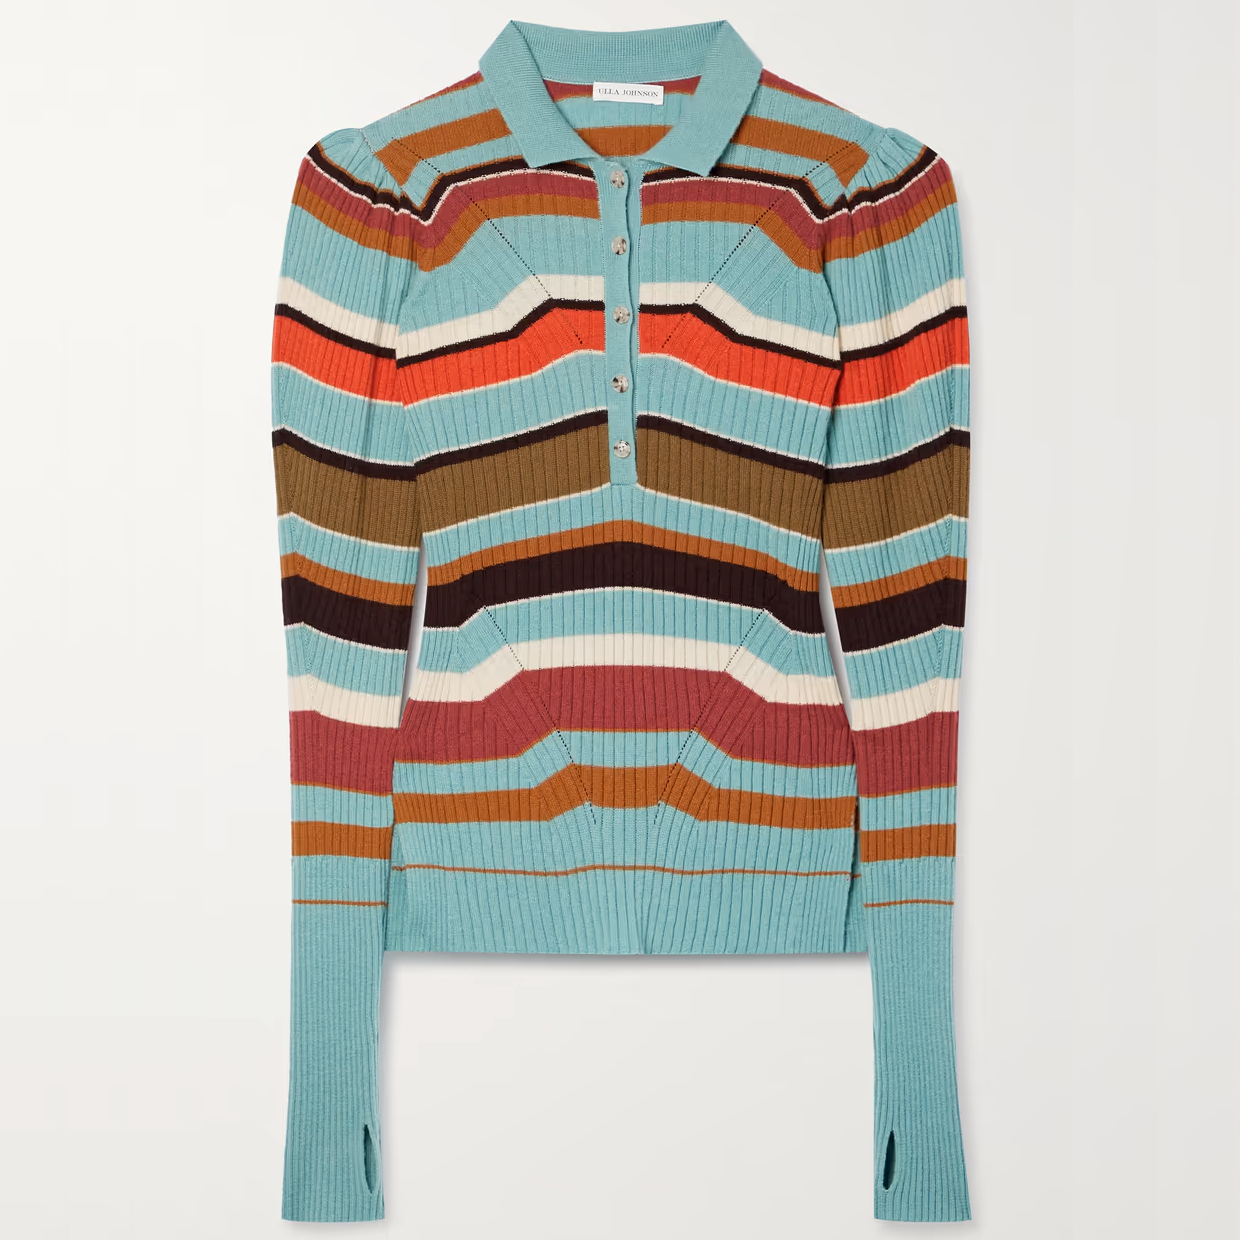 Ulla Johnson Chesca Striped Ribbed Wool And Cashmere-Blend Sweater, £475